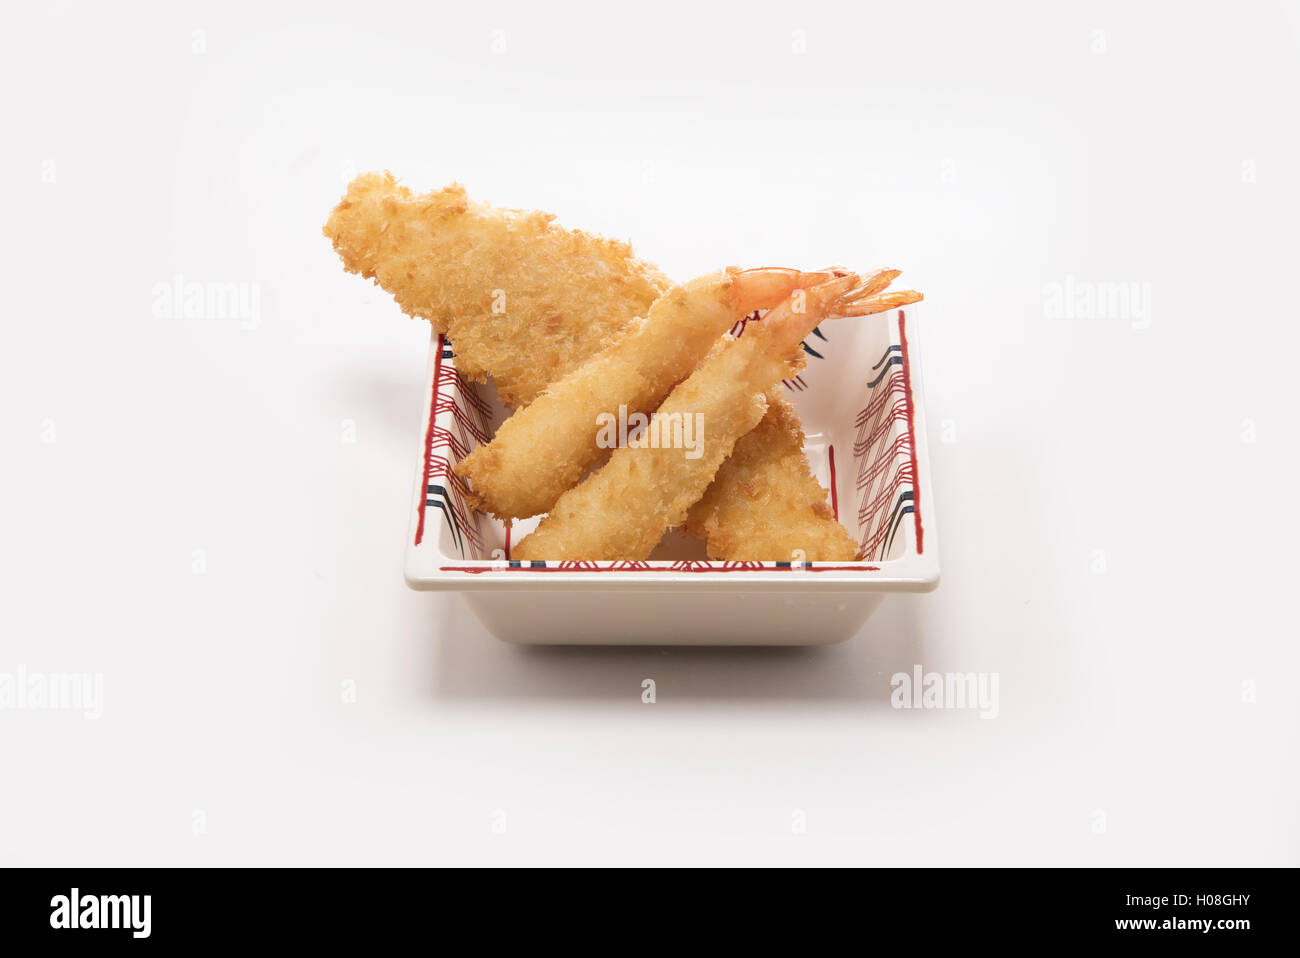 Shrimp and fish in batter floured and fried Stock Photo